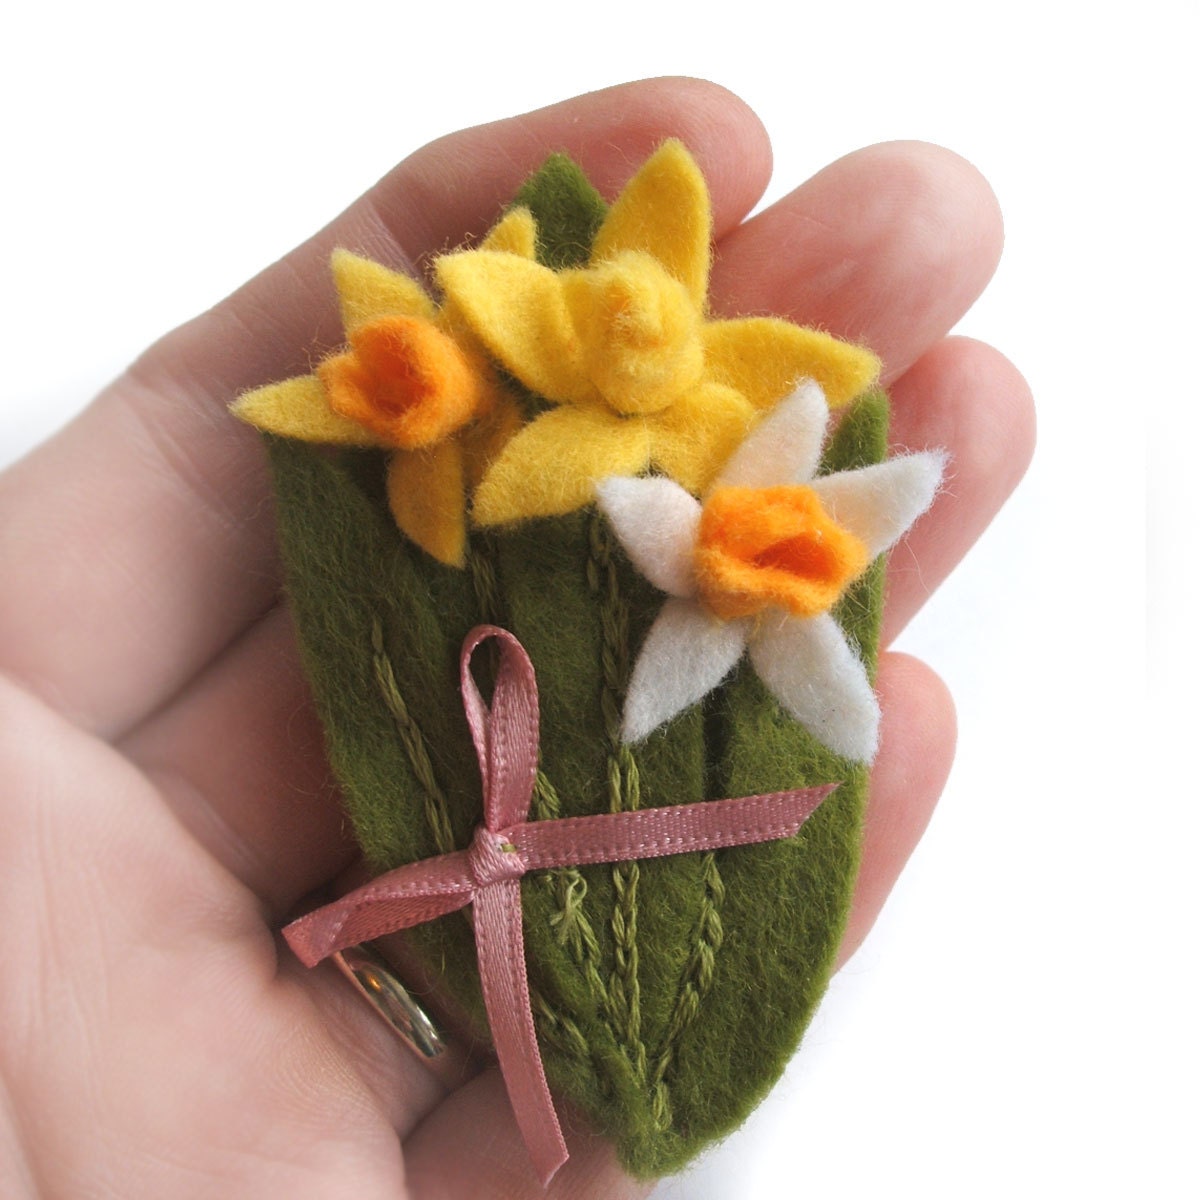 Daffodil Brooch, Welsh Gift, Yellow Flowers Felt Brooch For St Davids Day, Easter, March Birthday Or Mothers Day